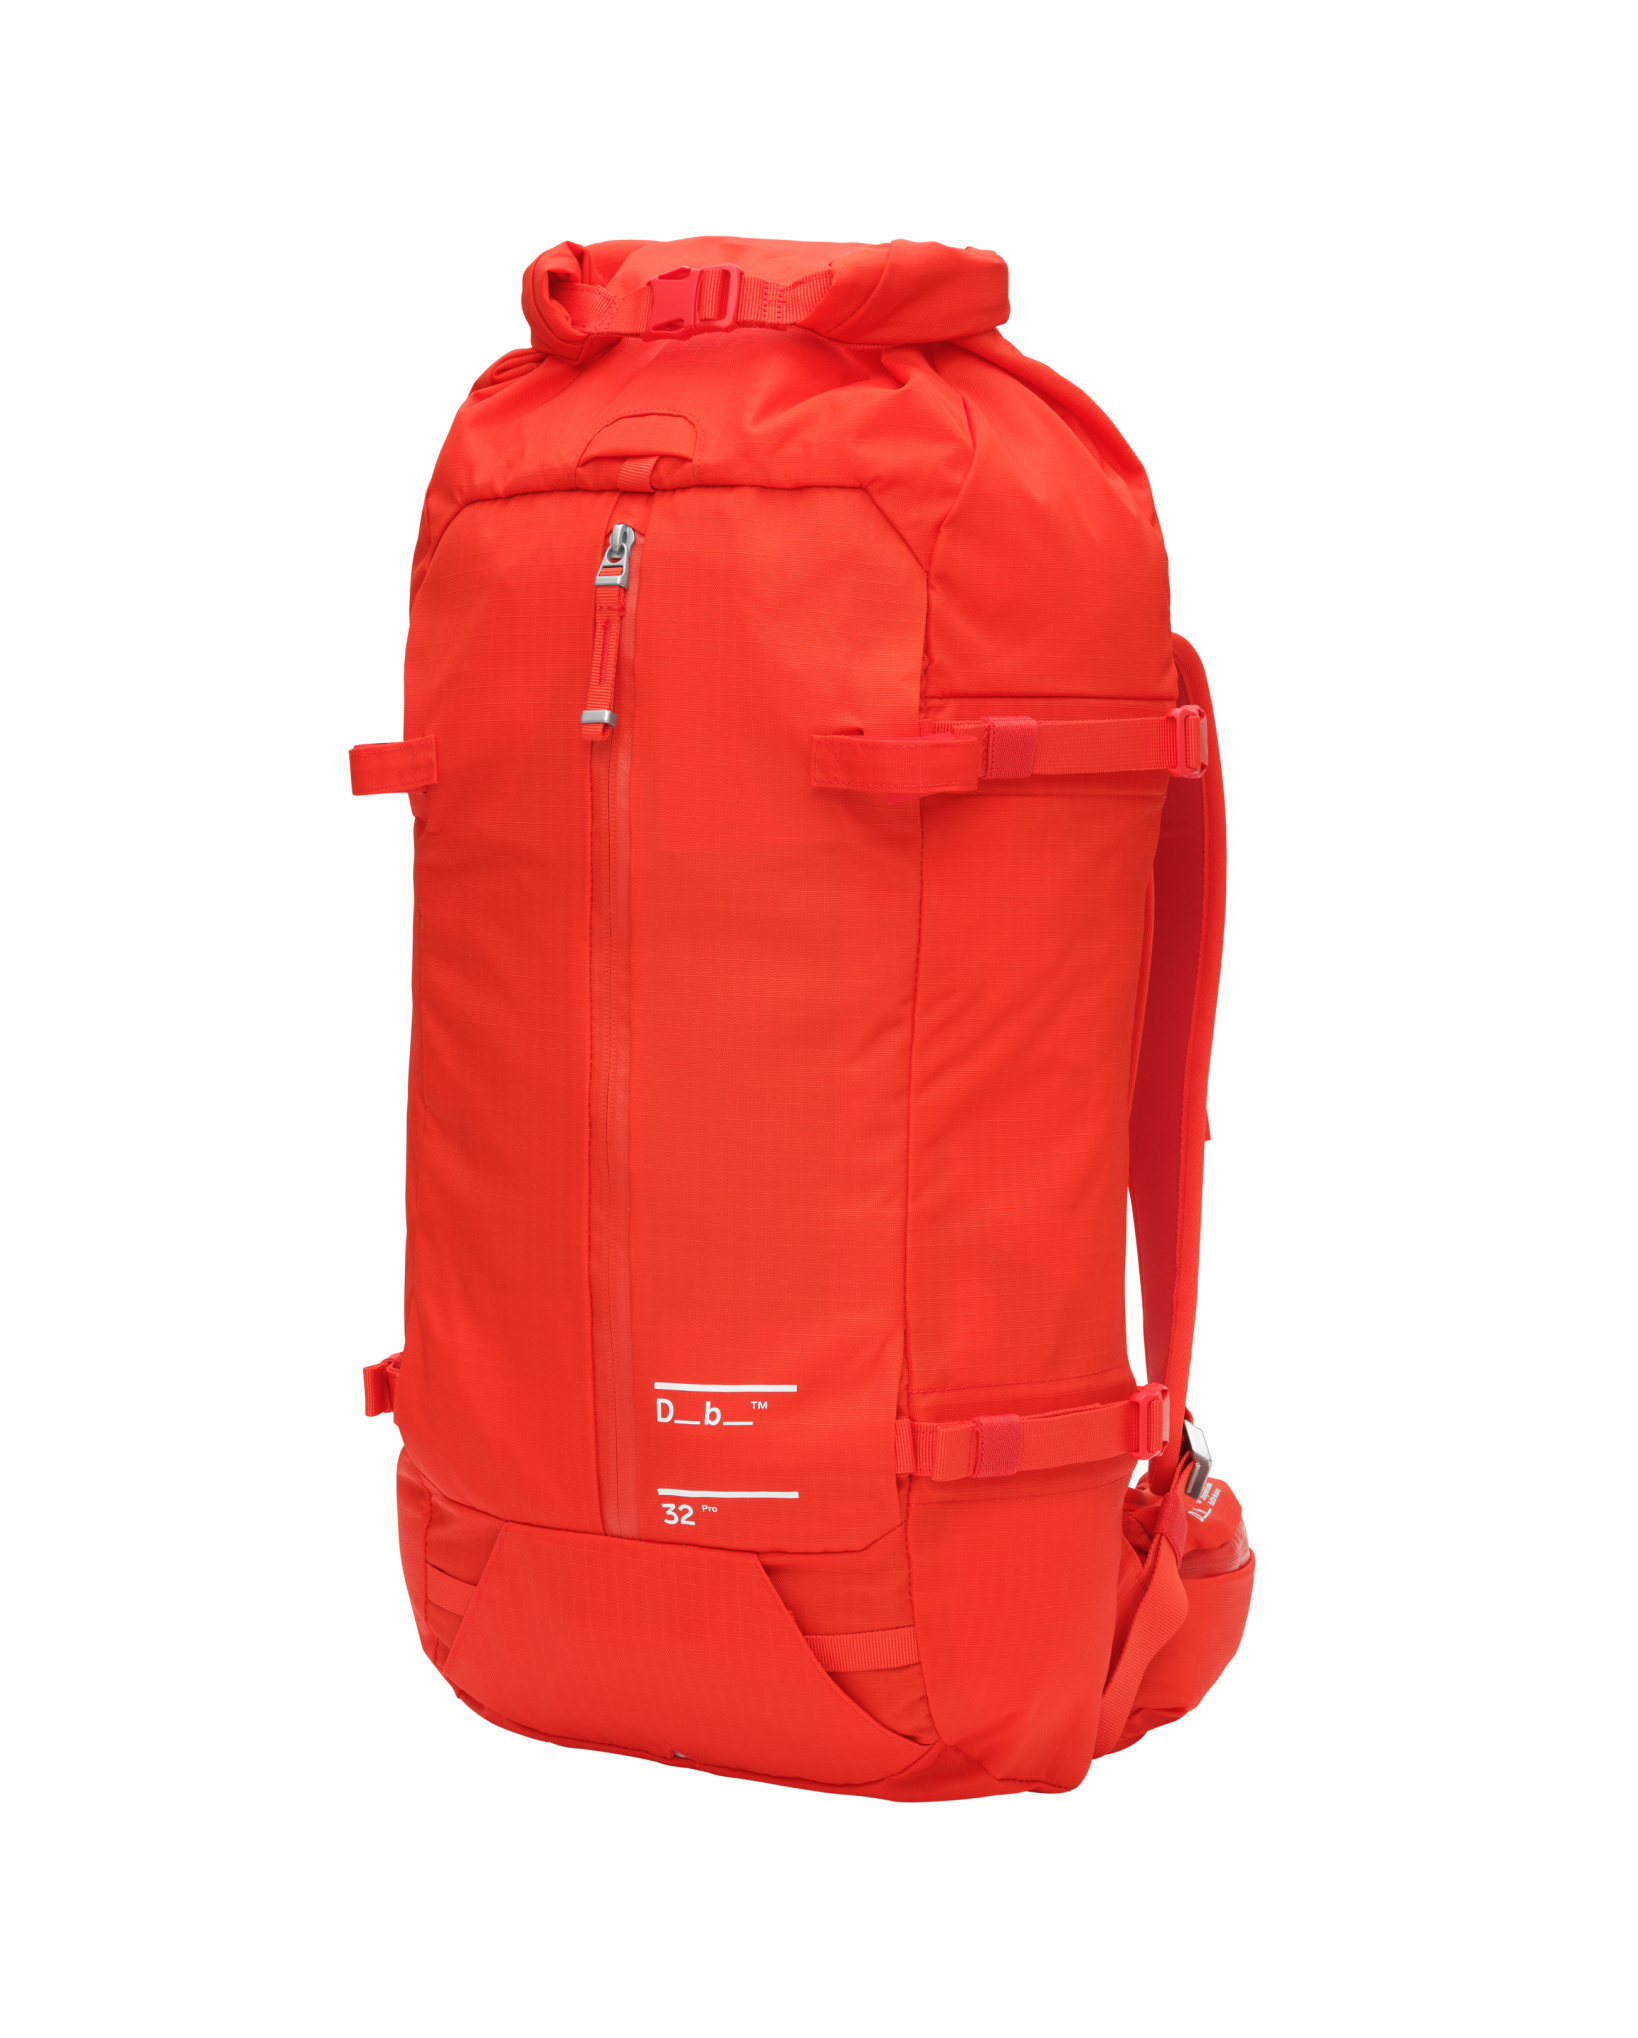 Snow Pro Backpack 32L Falu Red